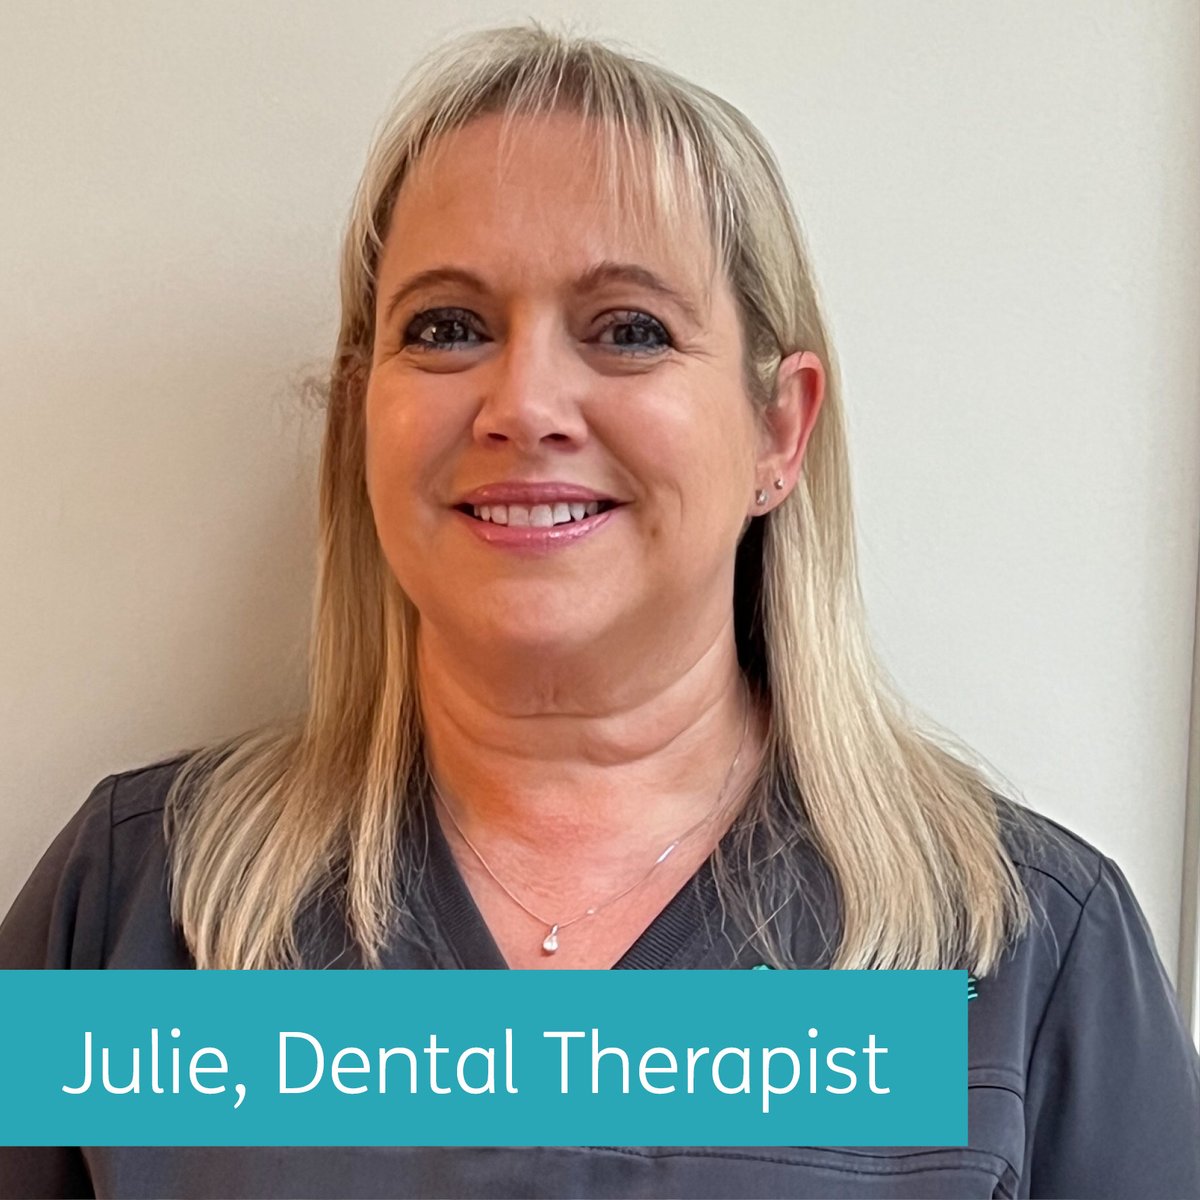 Julie qualified as a Dental Therapist in 2010 and has had an extensive career in Dentistry. She has great empathy with our older patients often talking to them about their memories. 
athomedental.co.uk/meet-the-team/ 
#dreamteam #meettheteam #dental #dentaltherapist